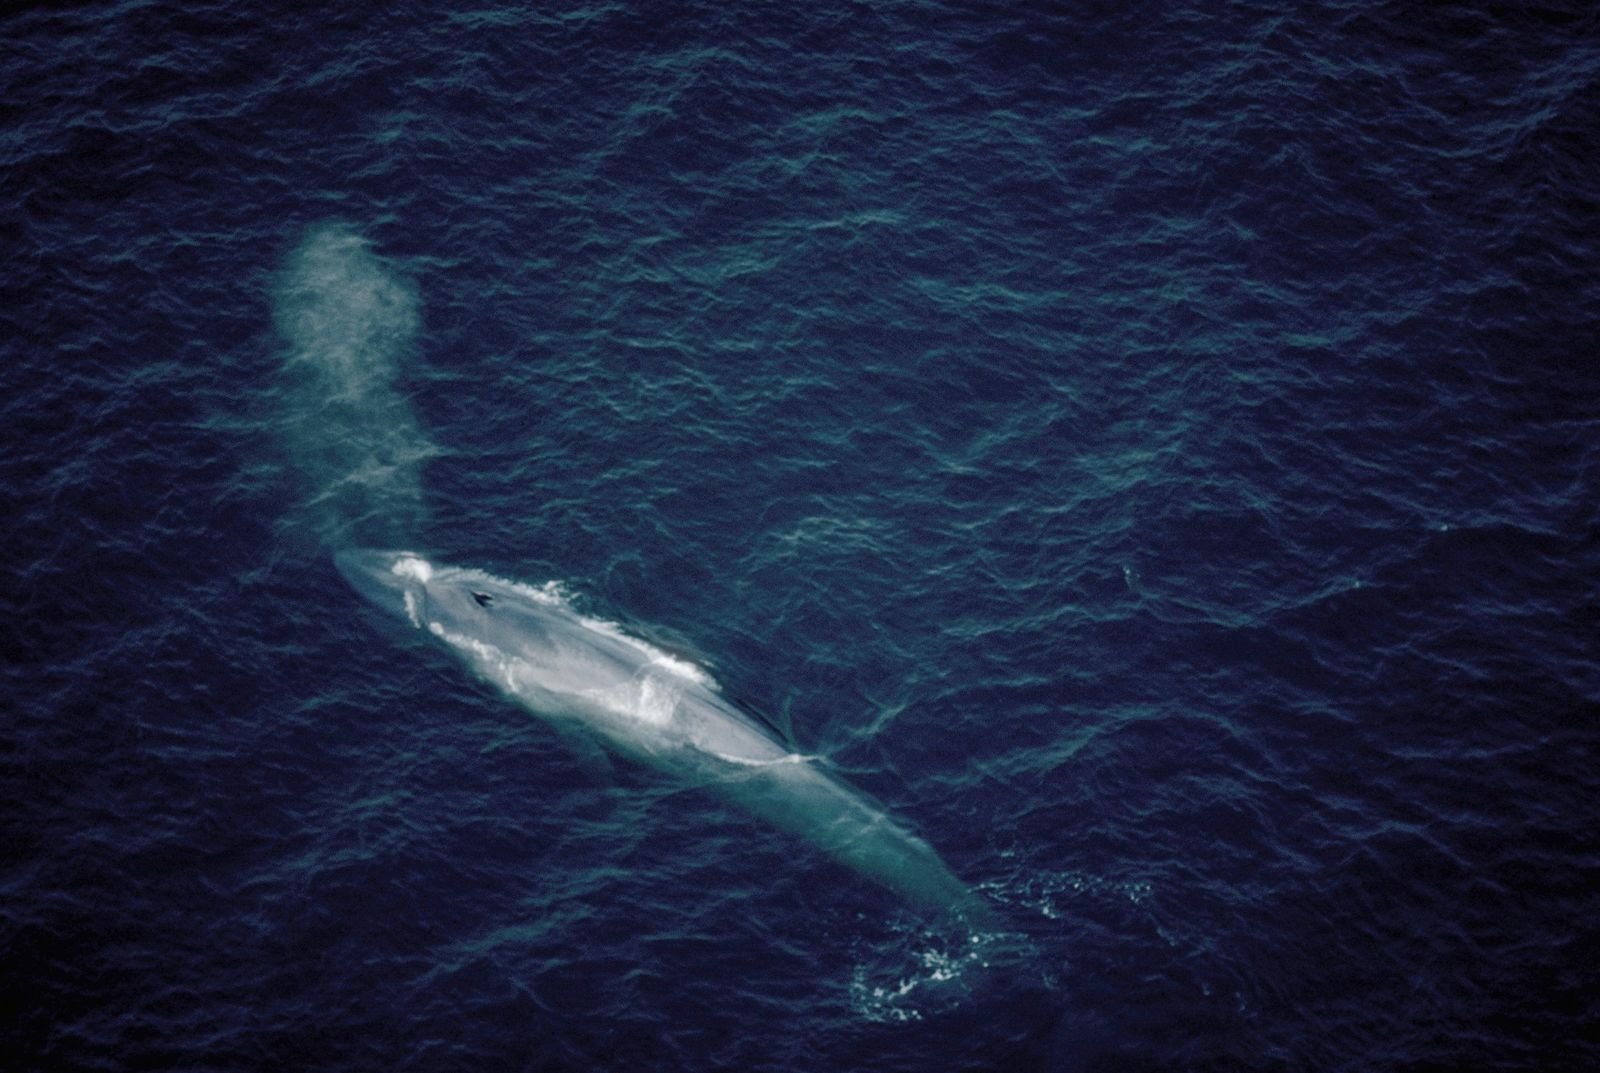 THE LONELIEST WHALE, So Who Does Respond